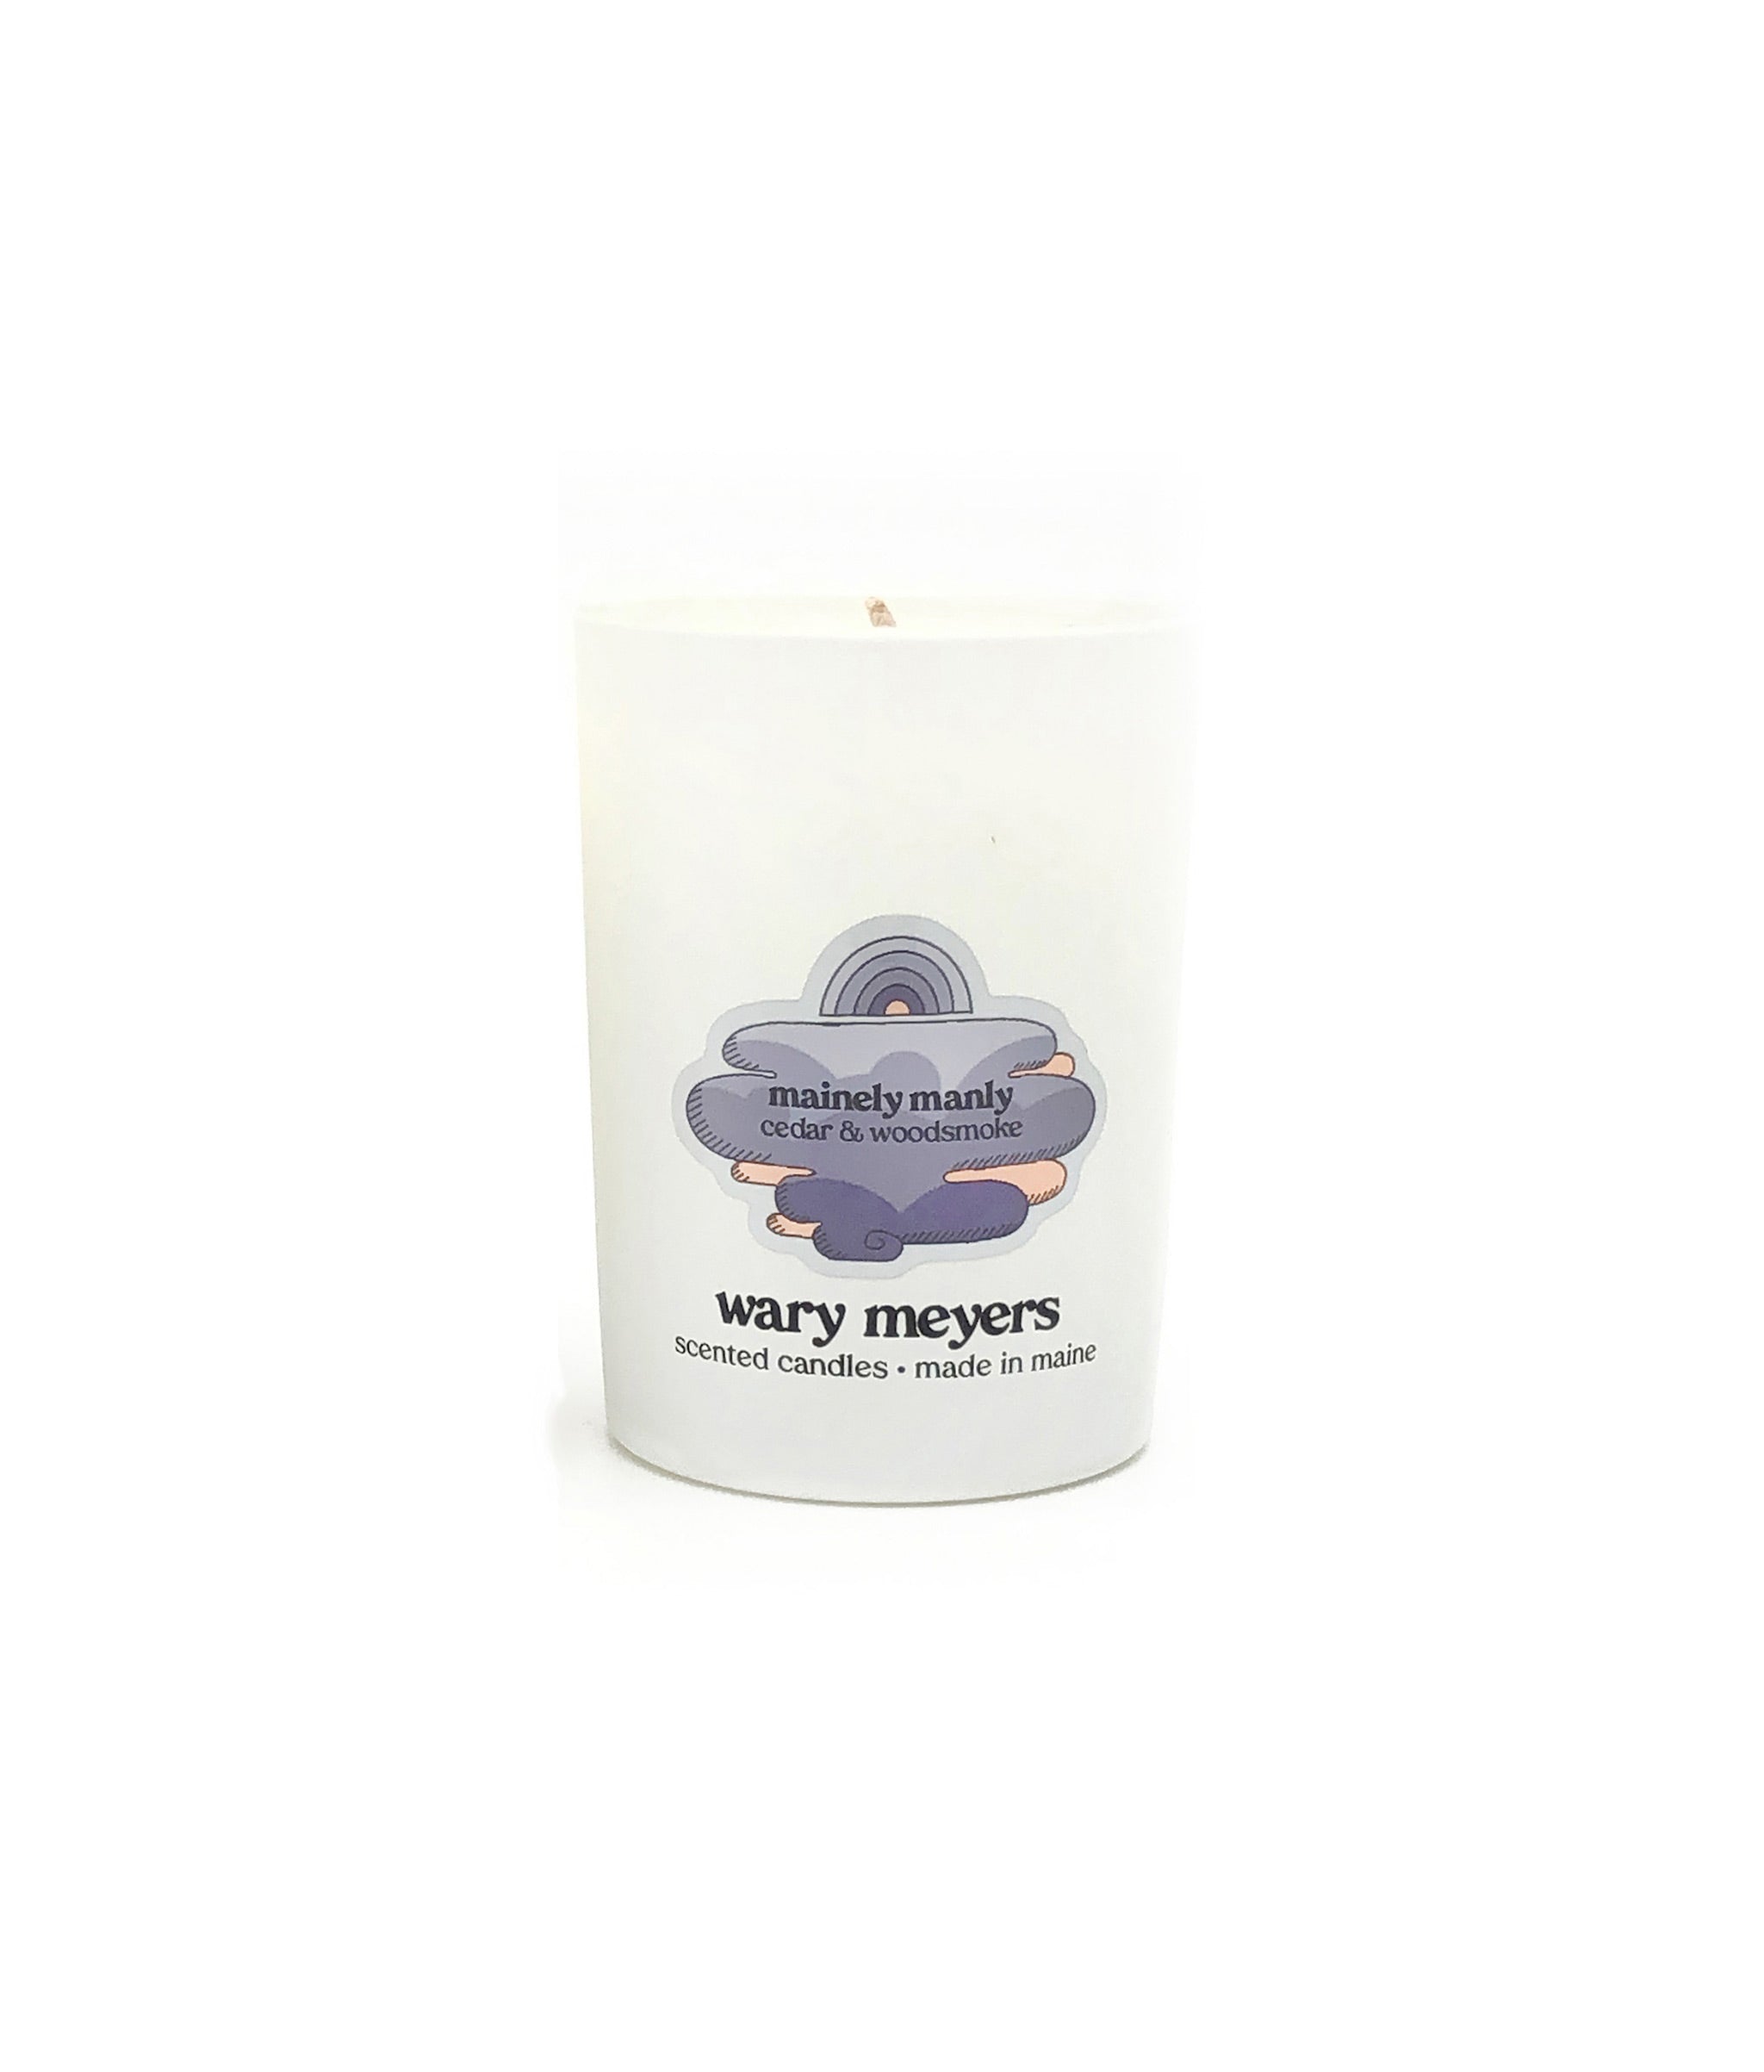 Mainly Manly Candle in glass holder by Wary Meyers, illustrated with lavender clouds. Cedar and woodsmoke scent.